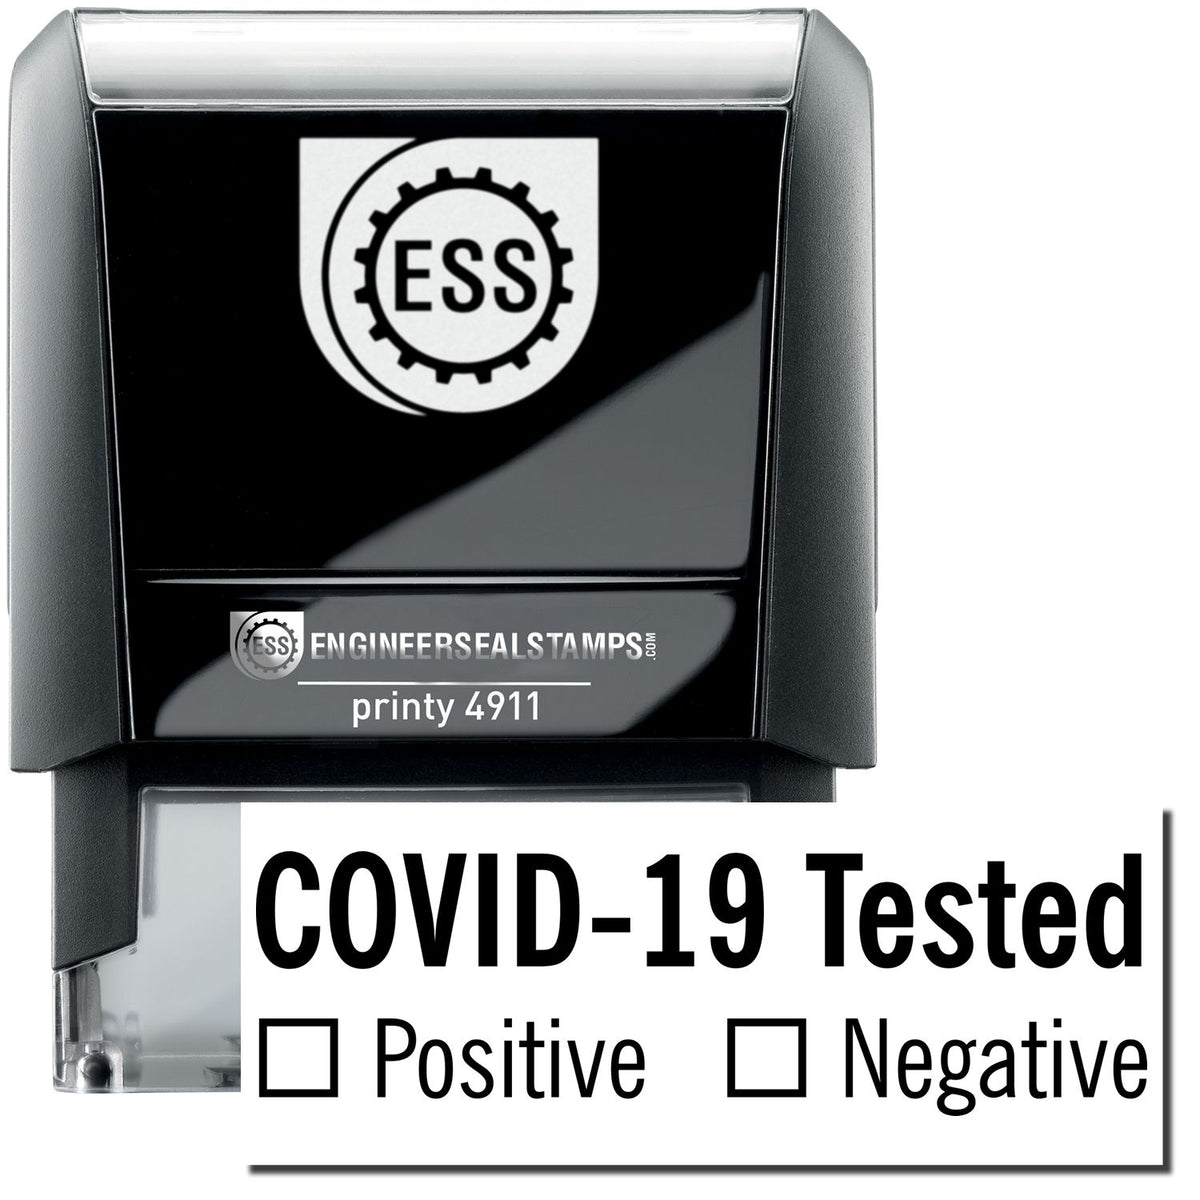 A self-inking stamp with a stamped image showing how the text &quot;COVID-19 Tested&quot; with the words &quot;Positive&quot; and &quot;Negative&quot; underneath with checkboxes (where a box can be checked based on whether a person is positive or negative for the virus) is displayed after stamping.